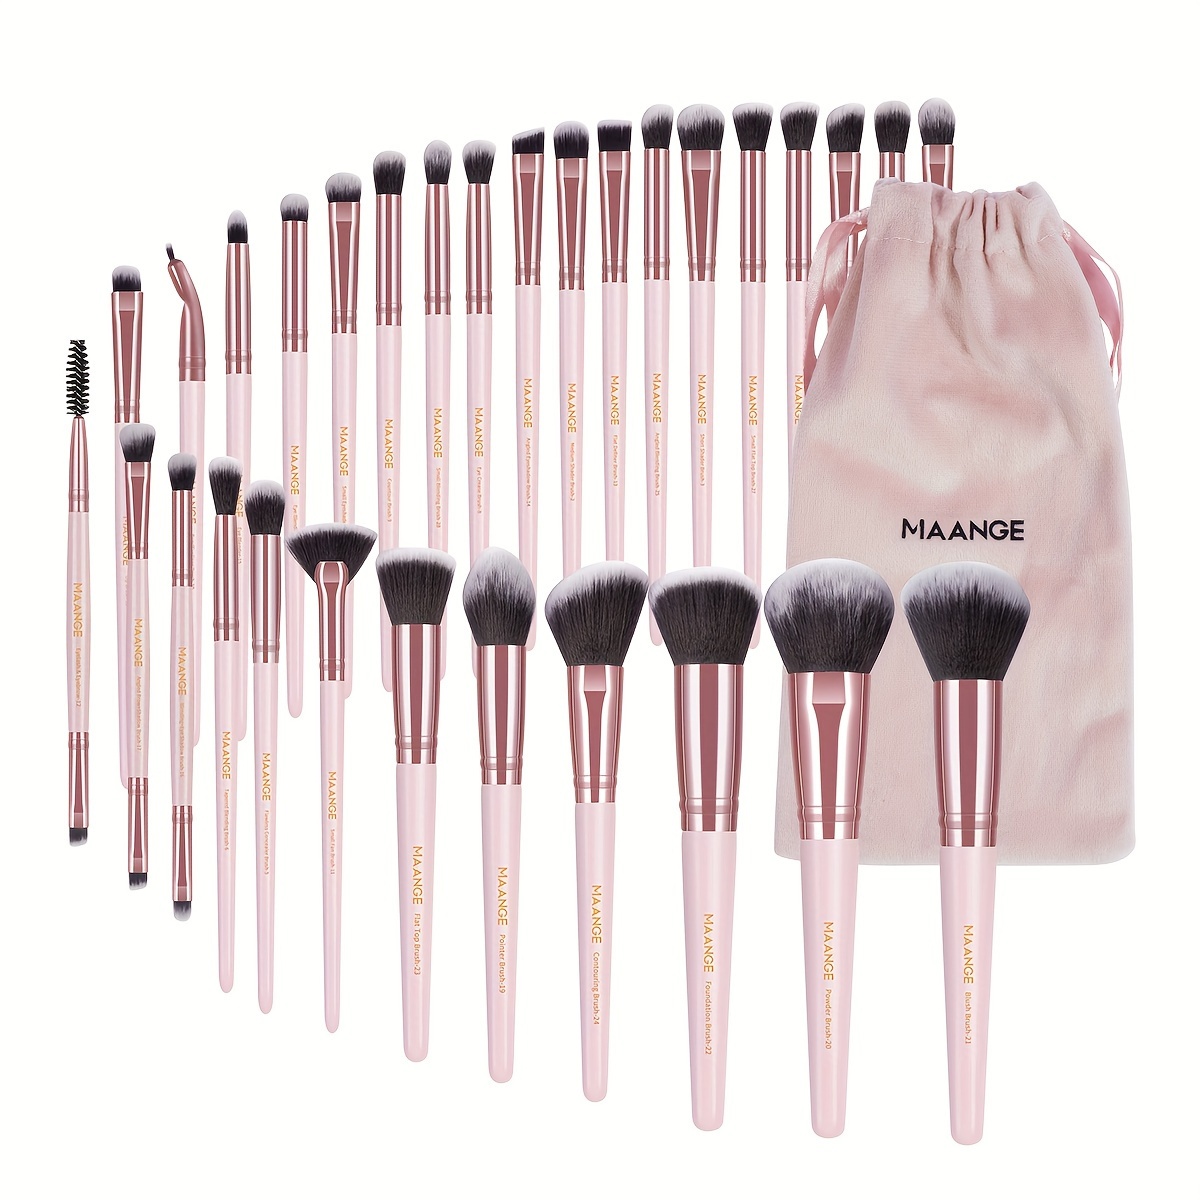 Real Perfection 16pcs Makeup Brushes Set with 1 Eyebrow Razor Premium  Synthetic Foundation Blending Face Powder Eye Shadow Concealer Make Up  Brushes